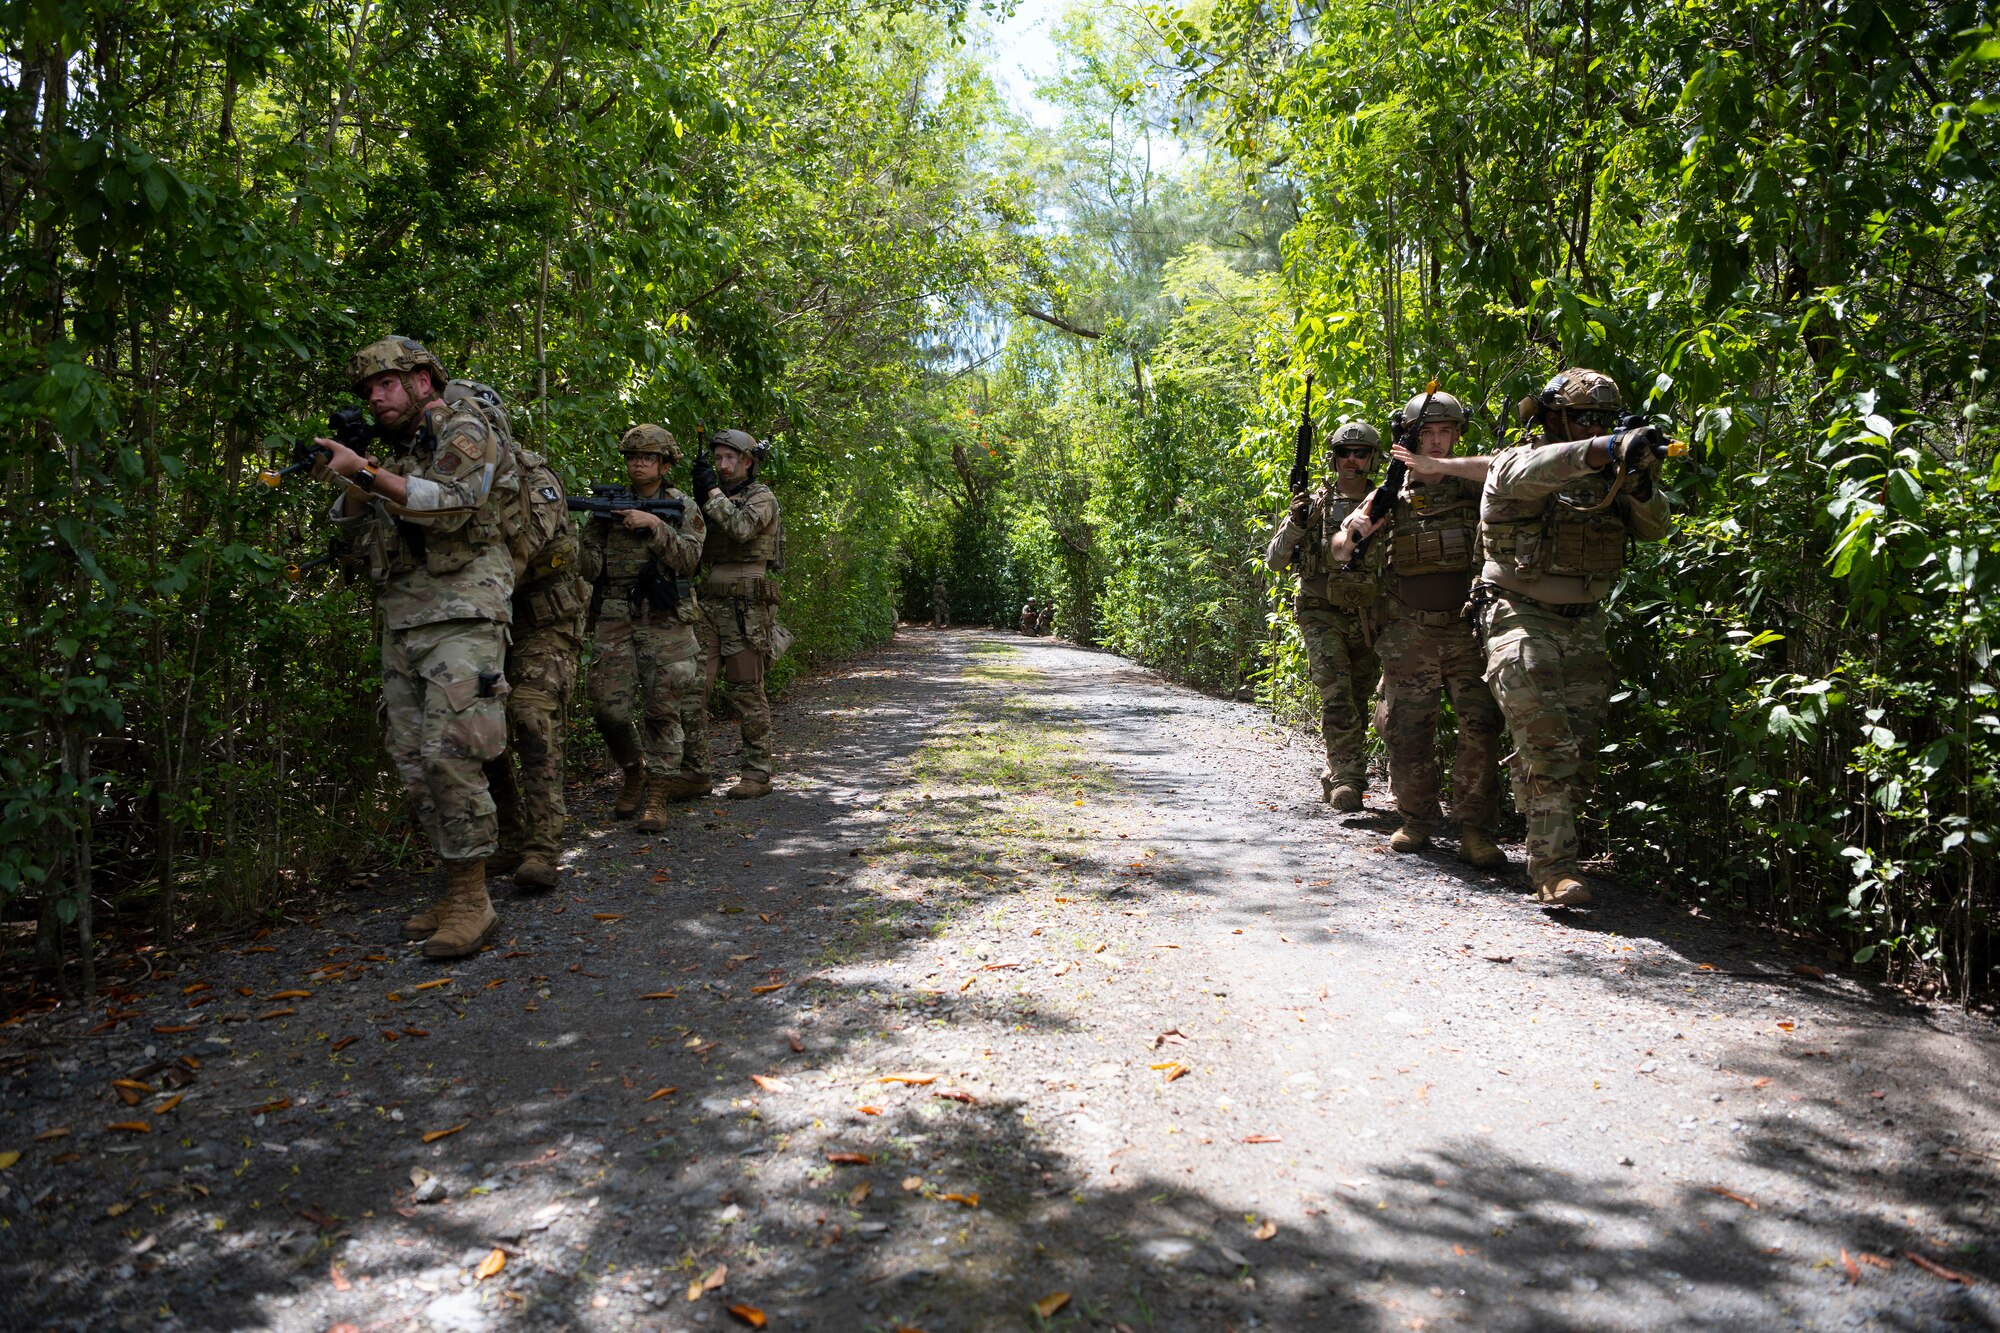 U.S. Airmen with the 156th Security Operations Squadron, Puerto Rico Air National Guard, and the 123rd Contingency Response Group, Kentucky Air National Guard, patrol a trail during air base ground defense training at Muñiz Air National Guard Base in Carolina, Puerto Rico, Sept. 21, 2023. During the training, Airmen reinforced air base ground defense skills utilized during contingency response operations in contested environments by practicing radio communications, warning and operation orders, vehicle searches, vehicle take-downs, close-quarter battle, and small team tactics. (U.S. Air National Guard photo by Master Sgt. Rafael D. Rosa)